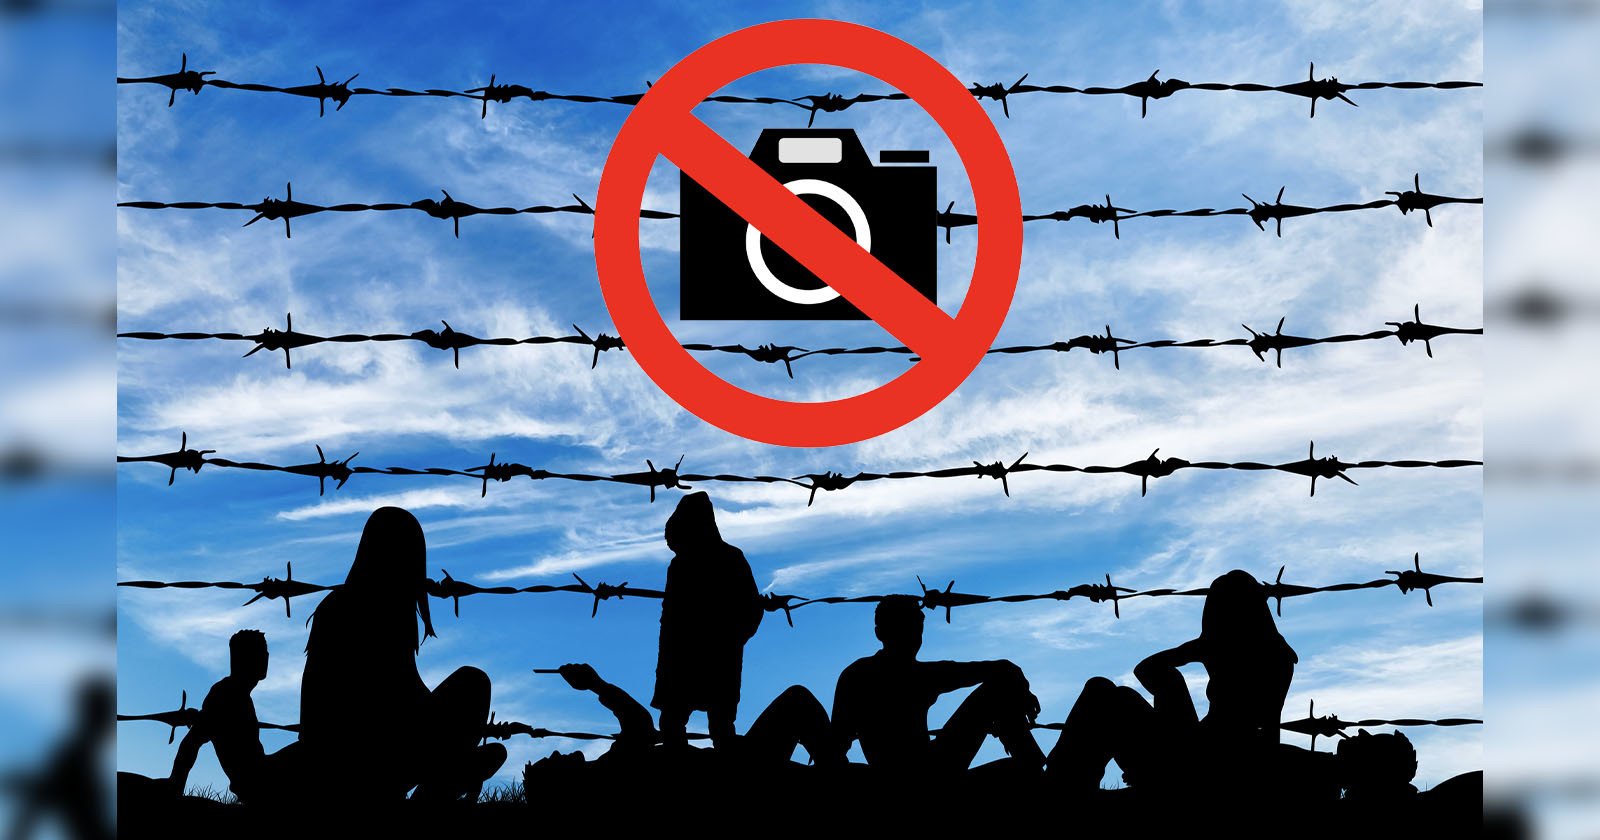 Pultizer Photographer is Fined Under Gag Law While Capturing Migrants